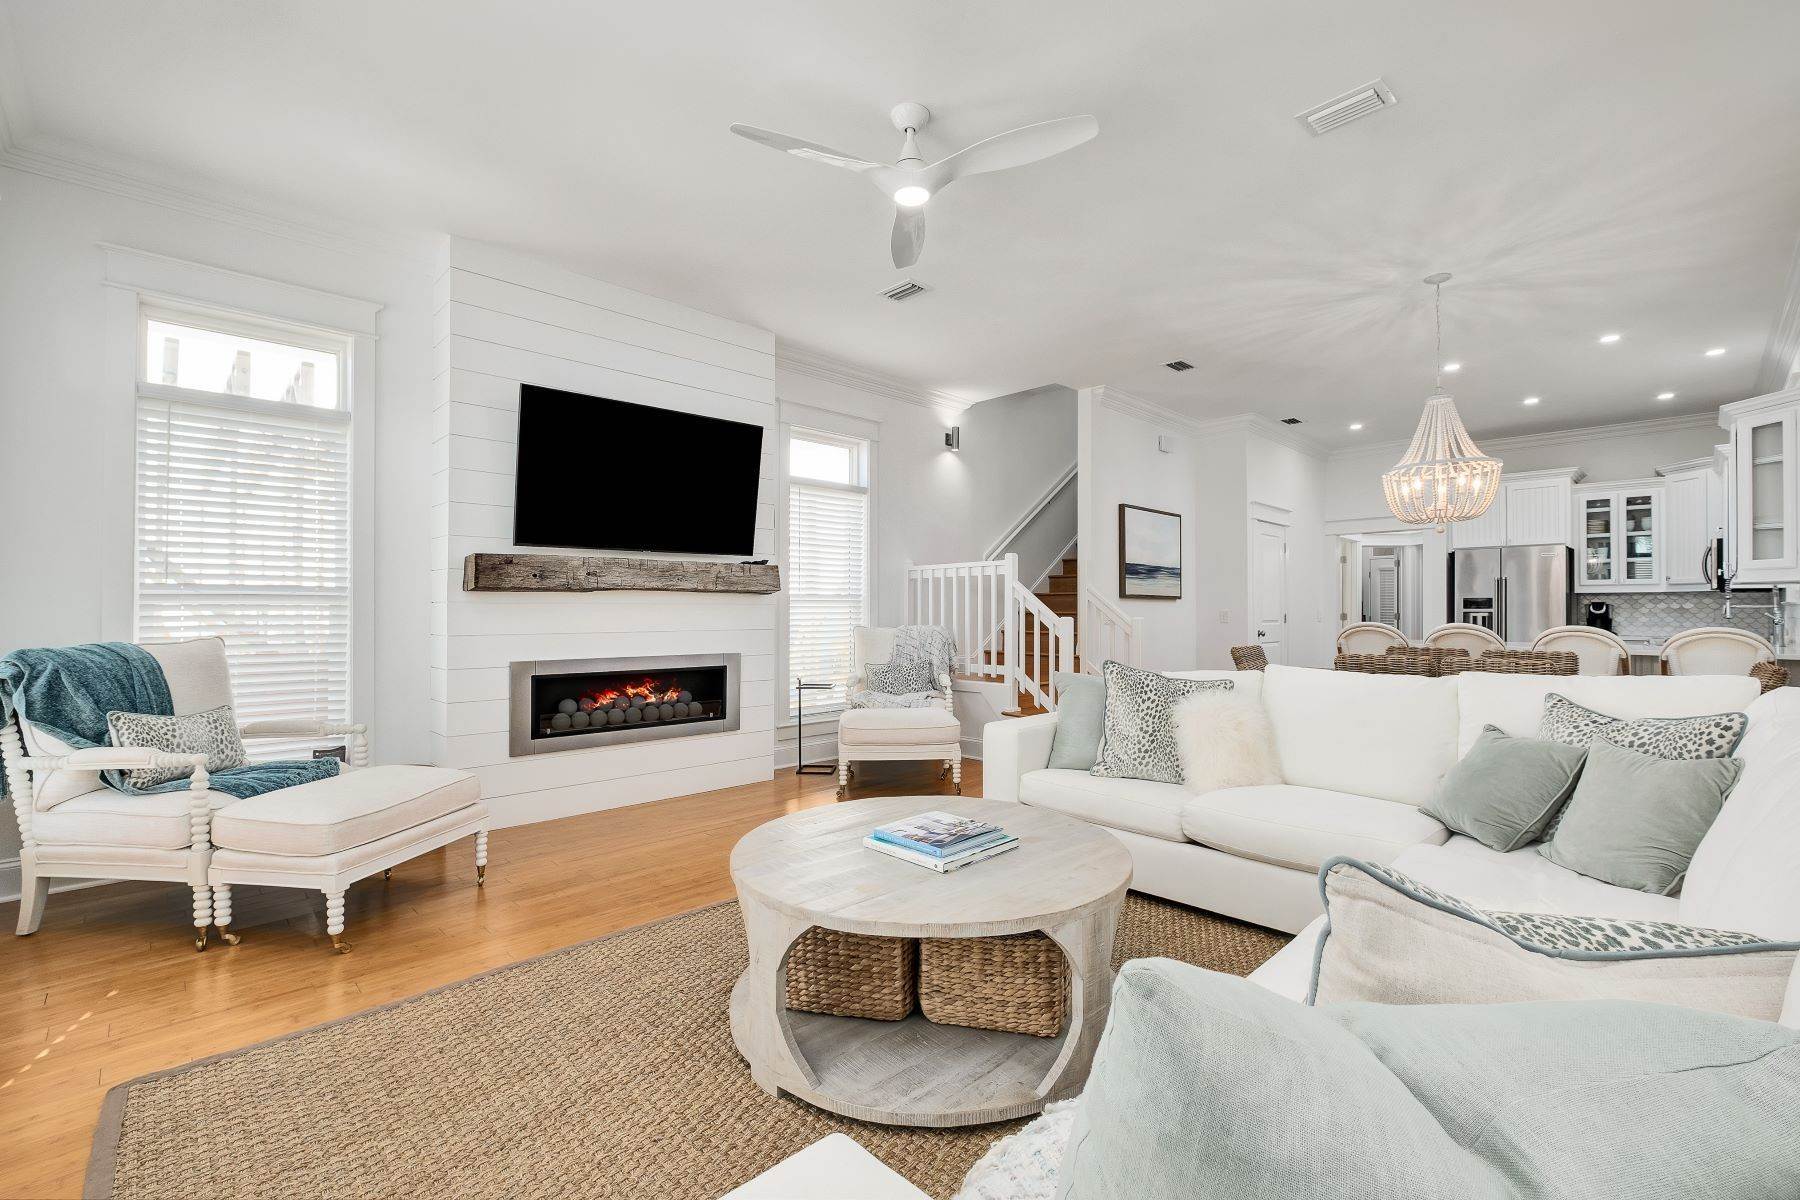 Single Family Homes for Sale at Fully-Renovated Beach House With Widow's Watch And Gulf Views 22702 Front Beach Road Panama City Beach, Florida 32413 United States